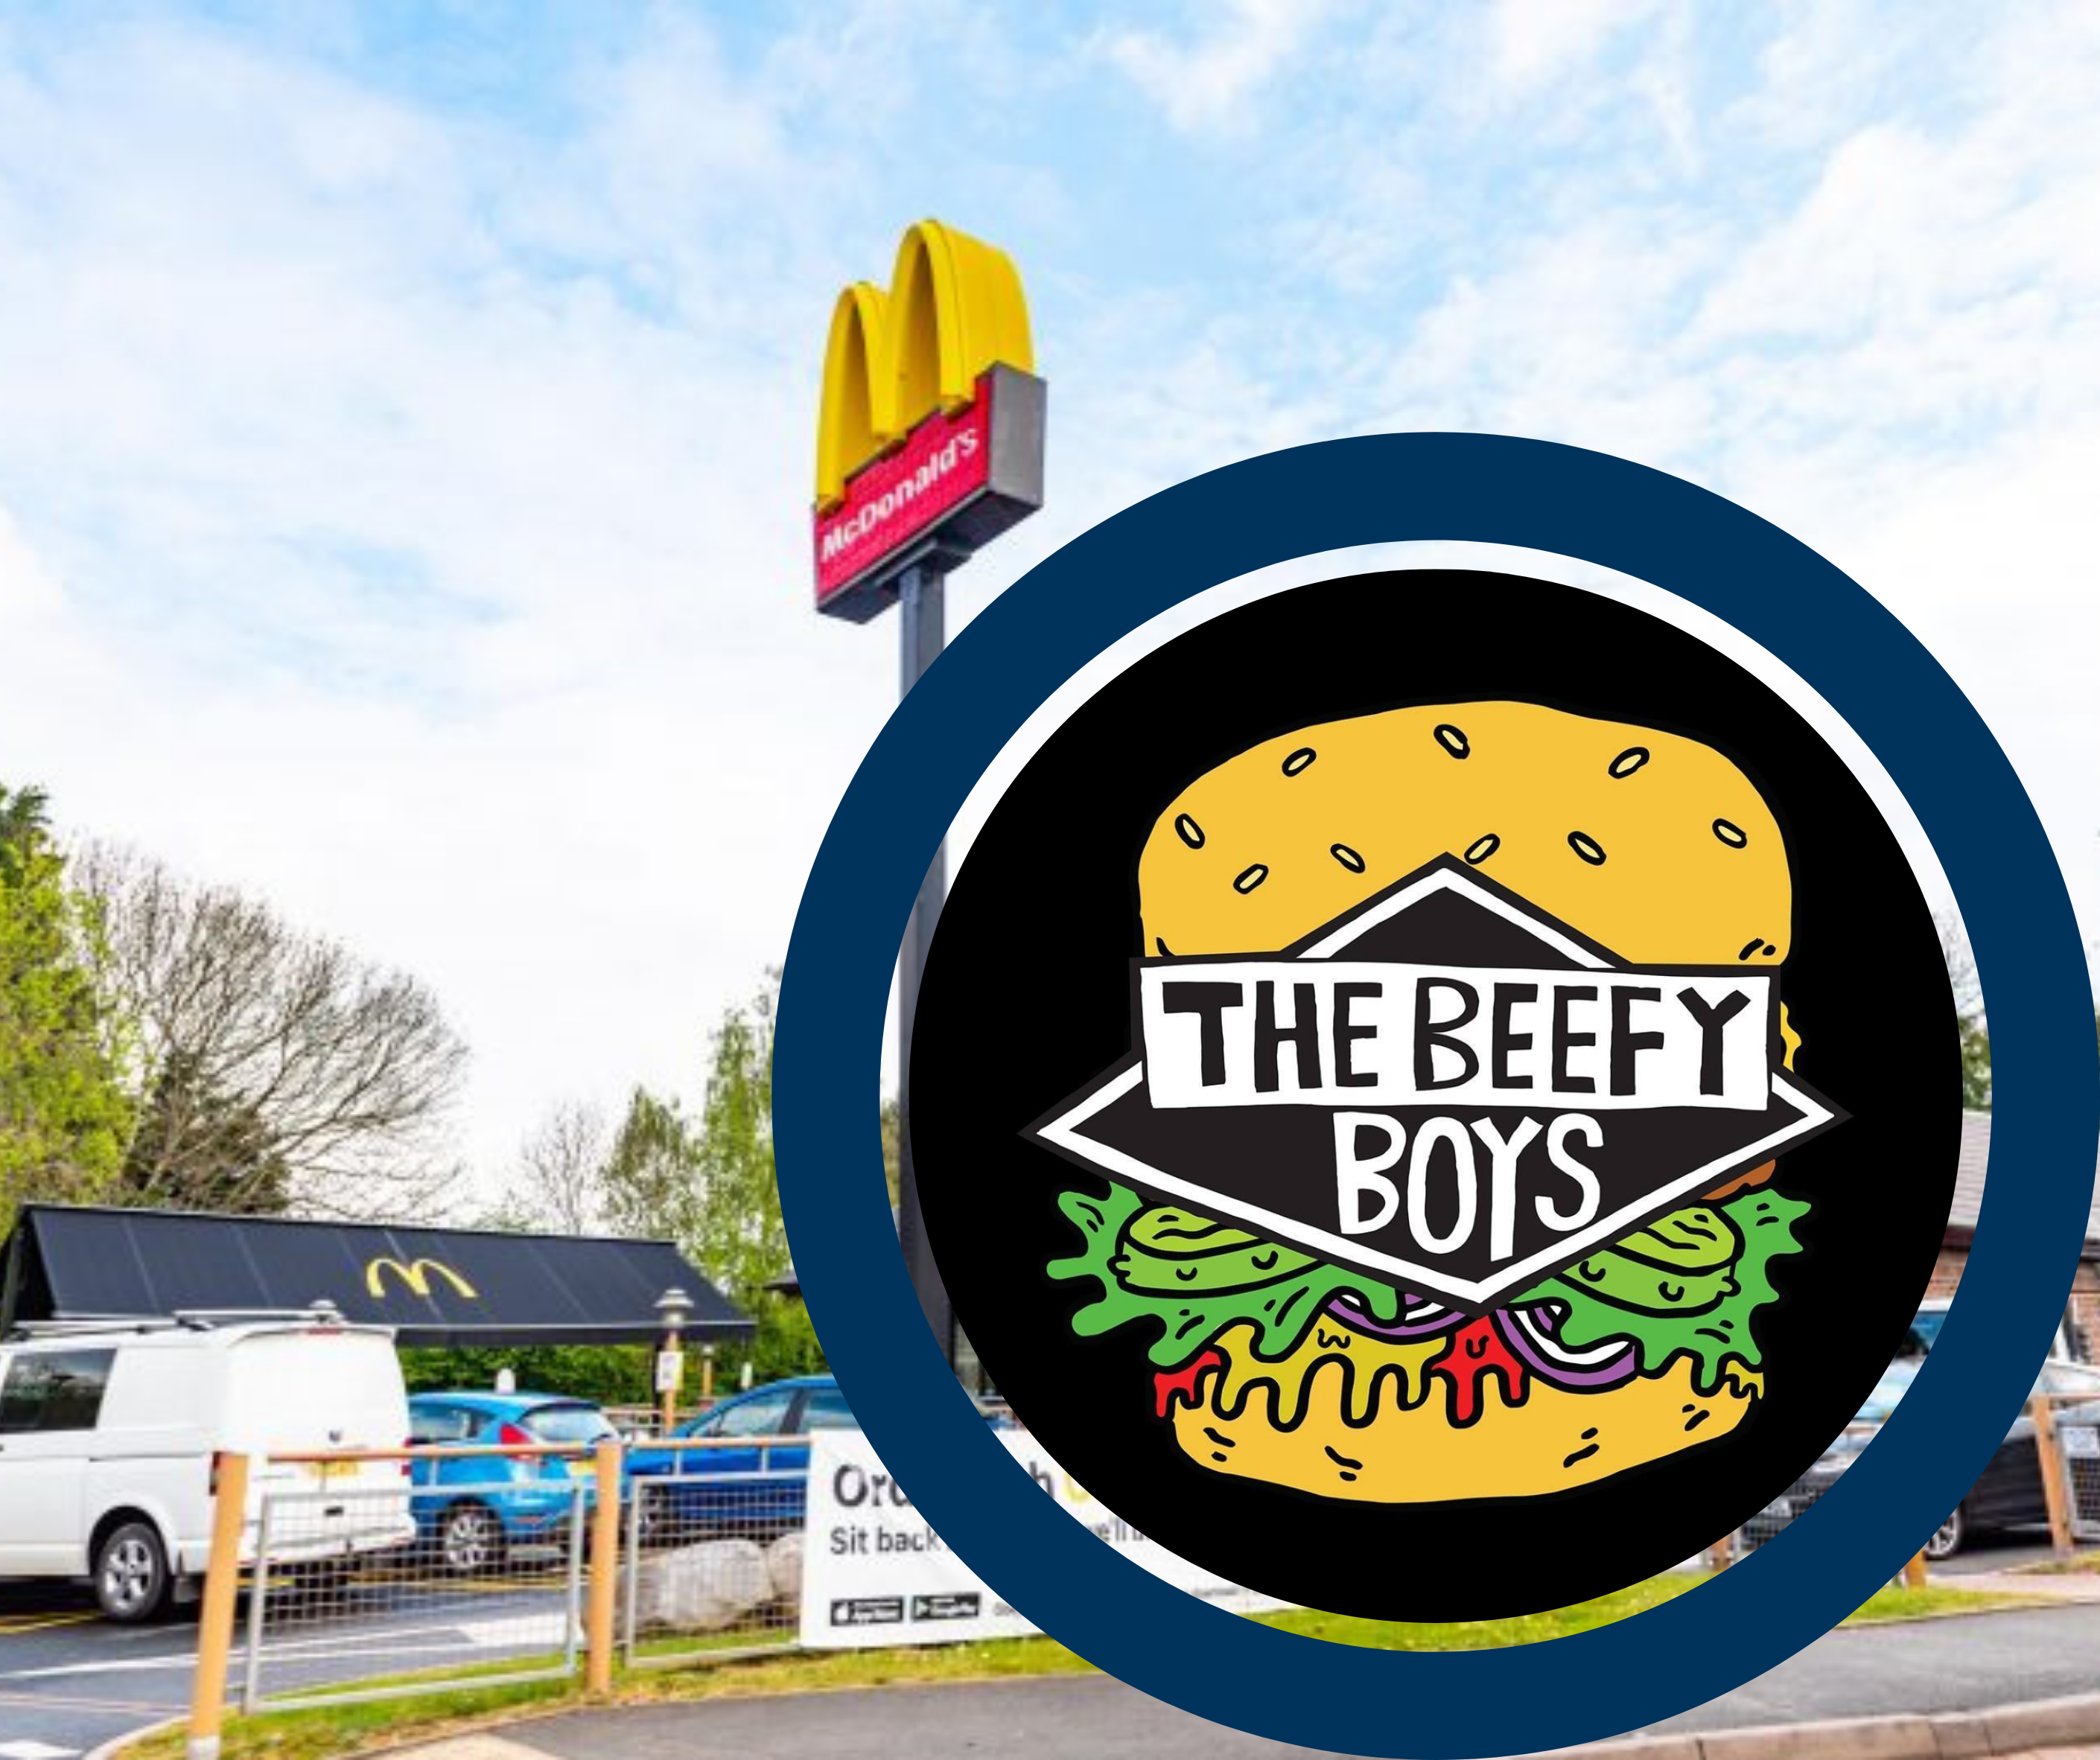 NEWS | ‘Give your staff the day off Ronald’ – The Beefy Boys respond to news that McDonald’s will open on Christmas Day